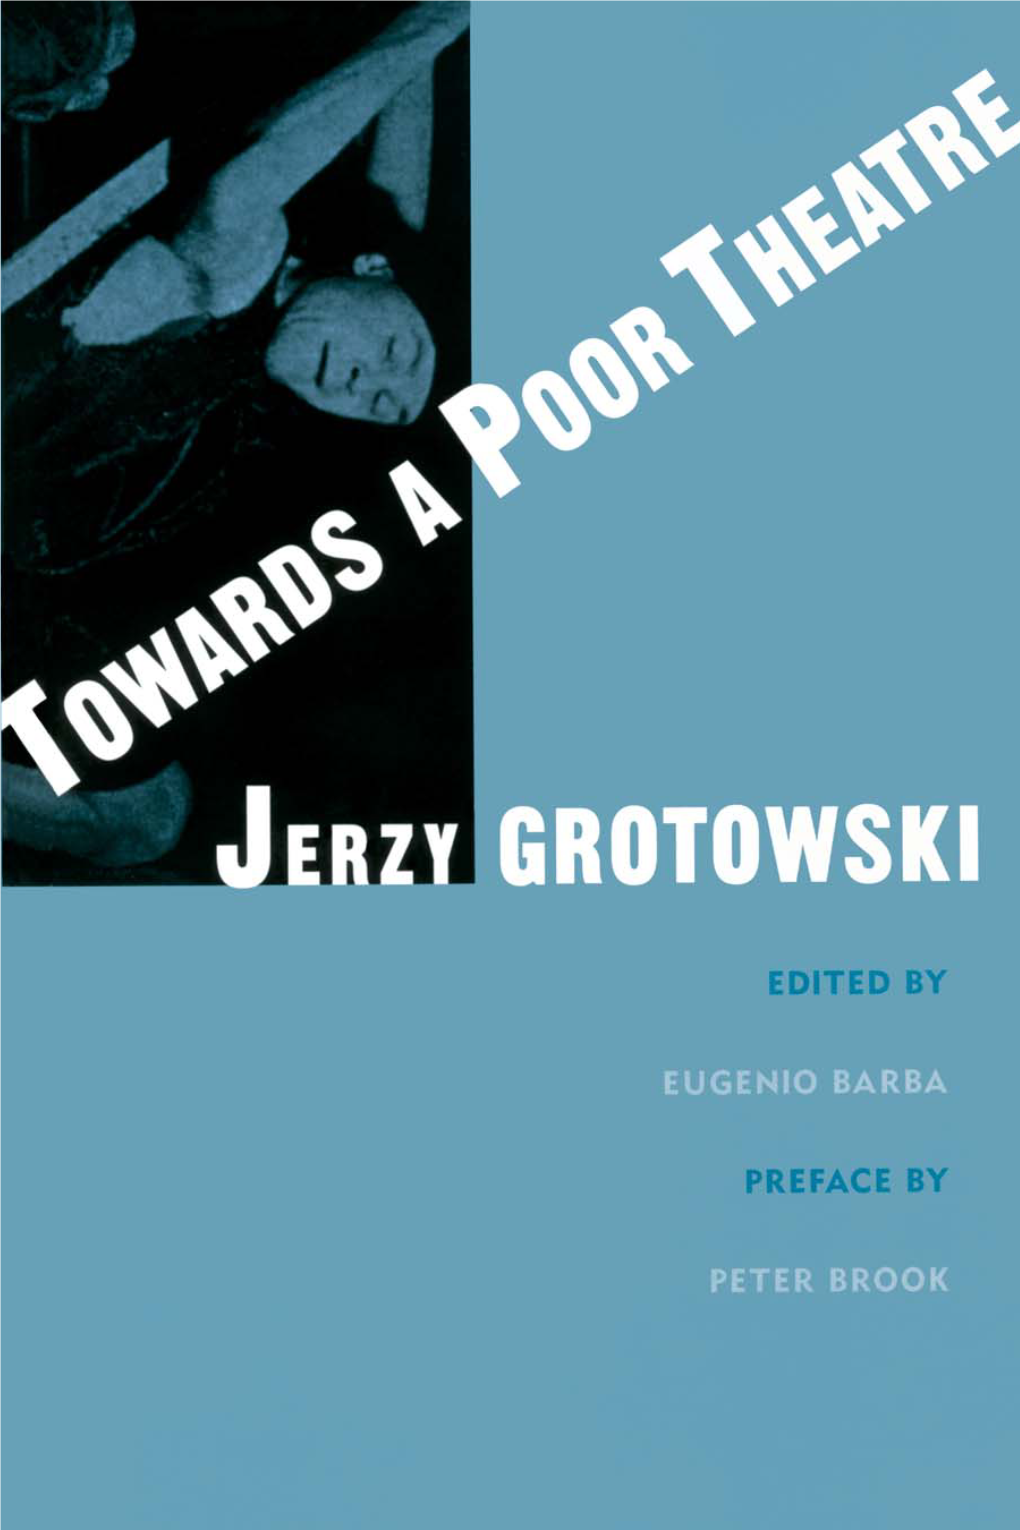 Jerzy Grotowski (1933-1999), Interviews with Him, and Other Supplementary Material Presenting His Method and Training